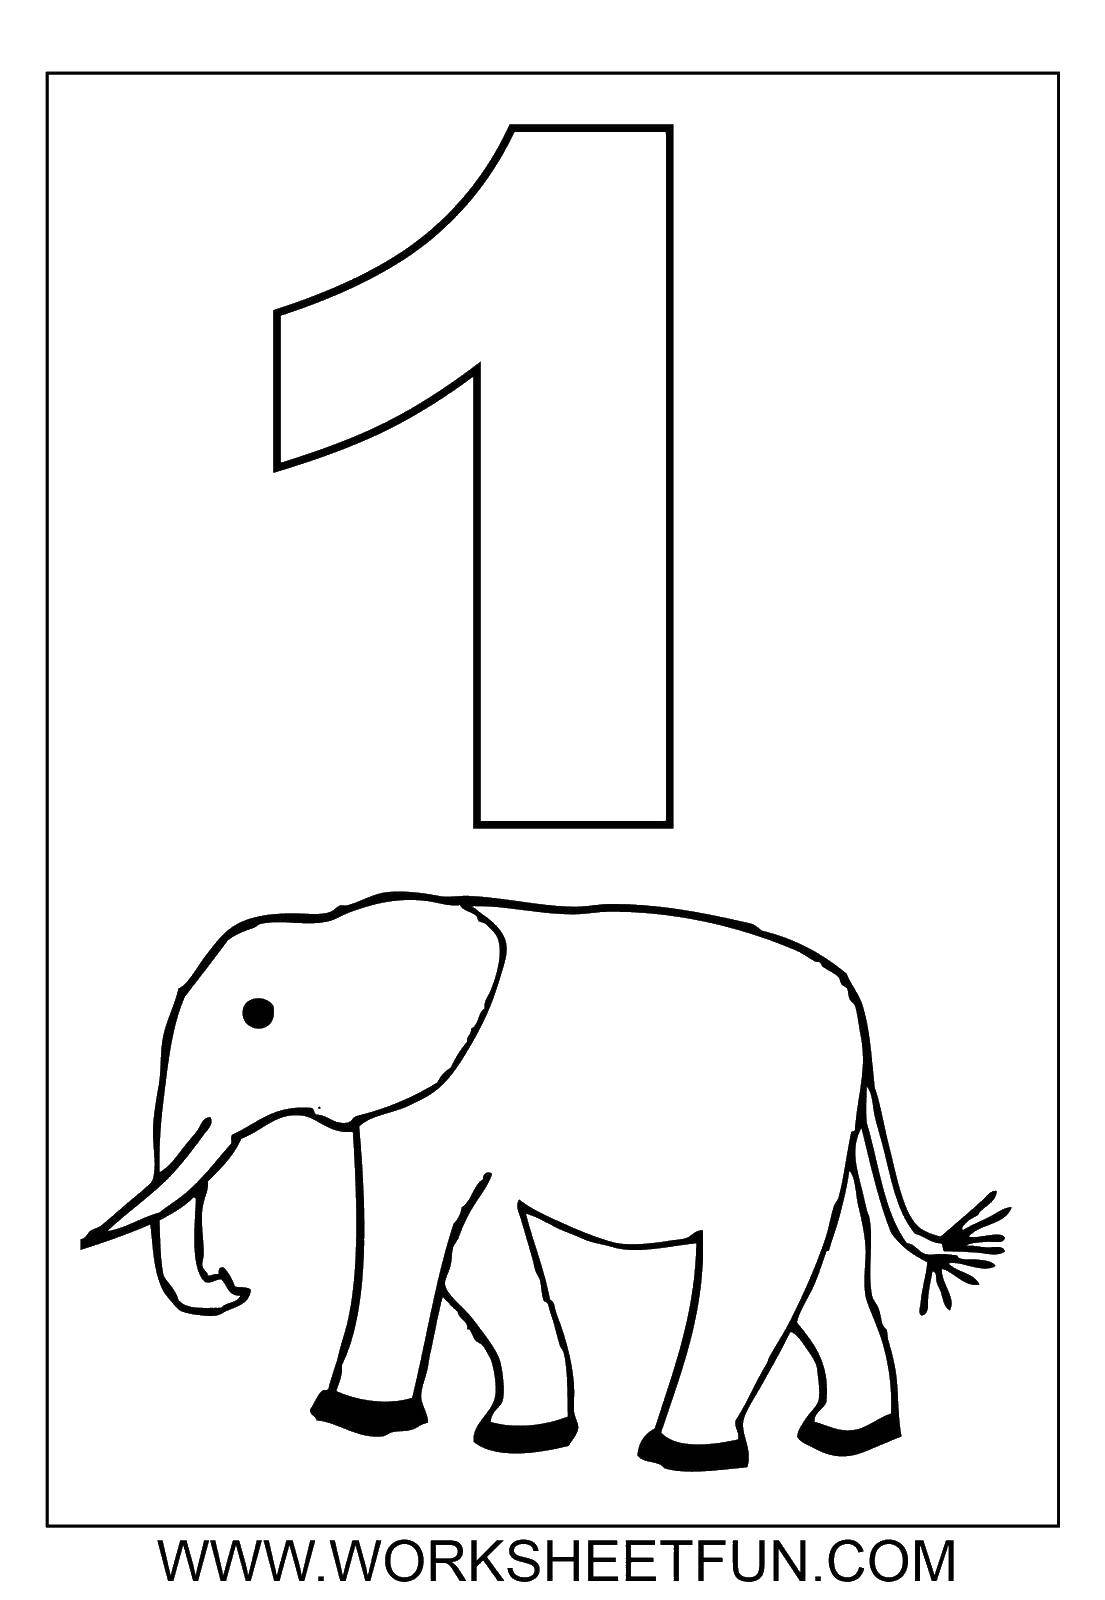 Coloring One elephant. Category Numbers. Tags:  Numbers , account numbers.